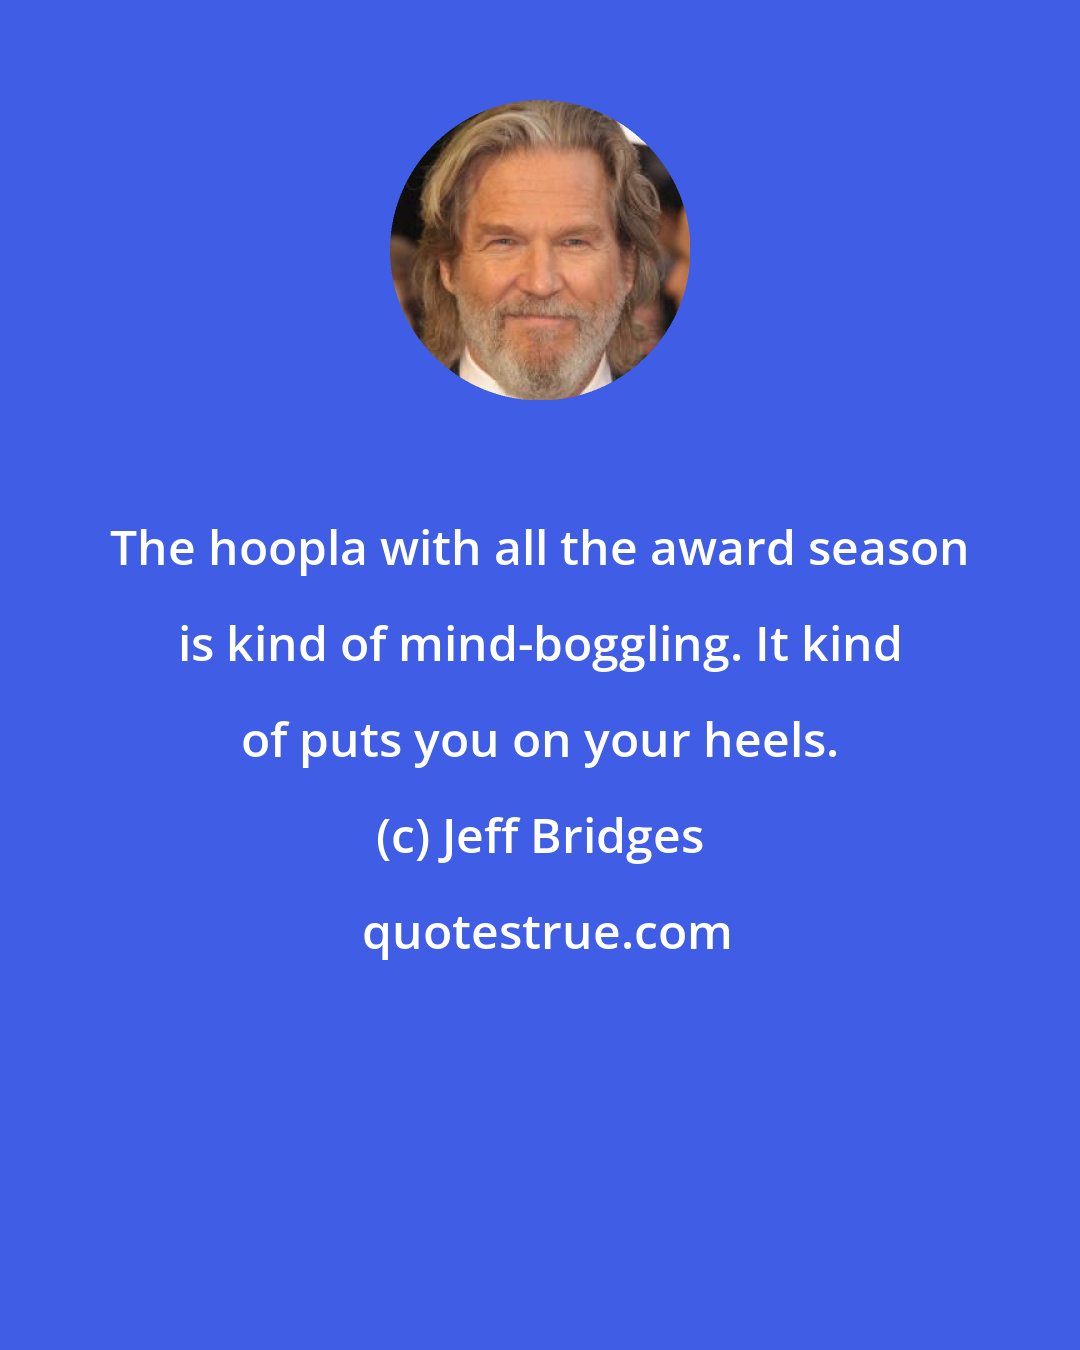 Jeff Bridges: The hoopla with all the award season is kind of mind-boggling. It kind of puts you on your heels.